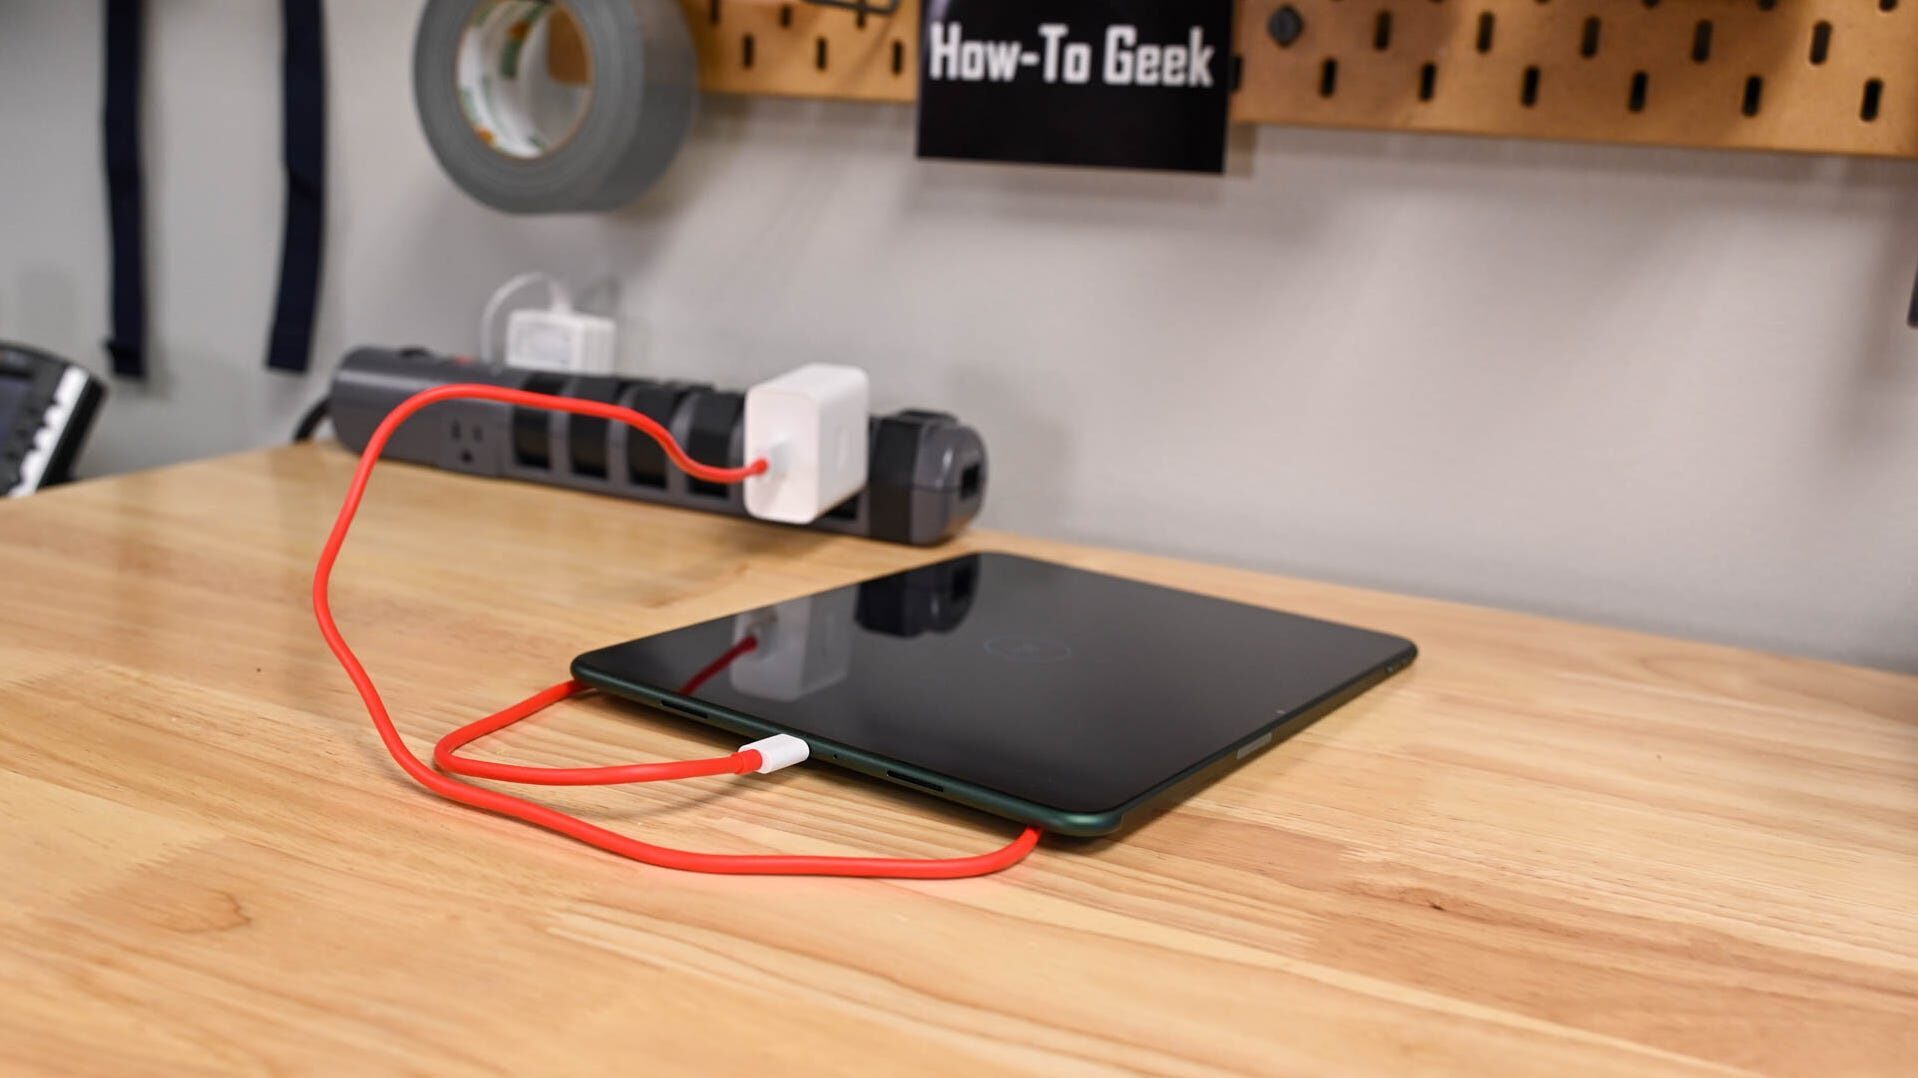 oneplus-pad-charging-on-a-workbenchjpg_52793550651_o-7837620